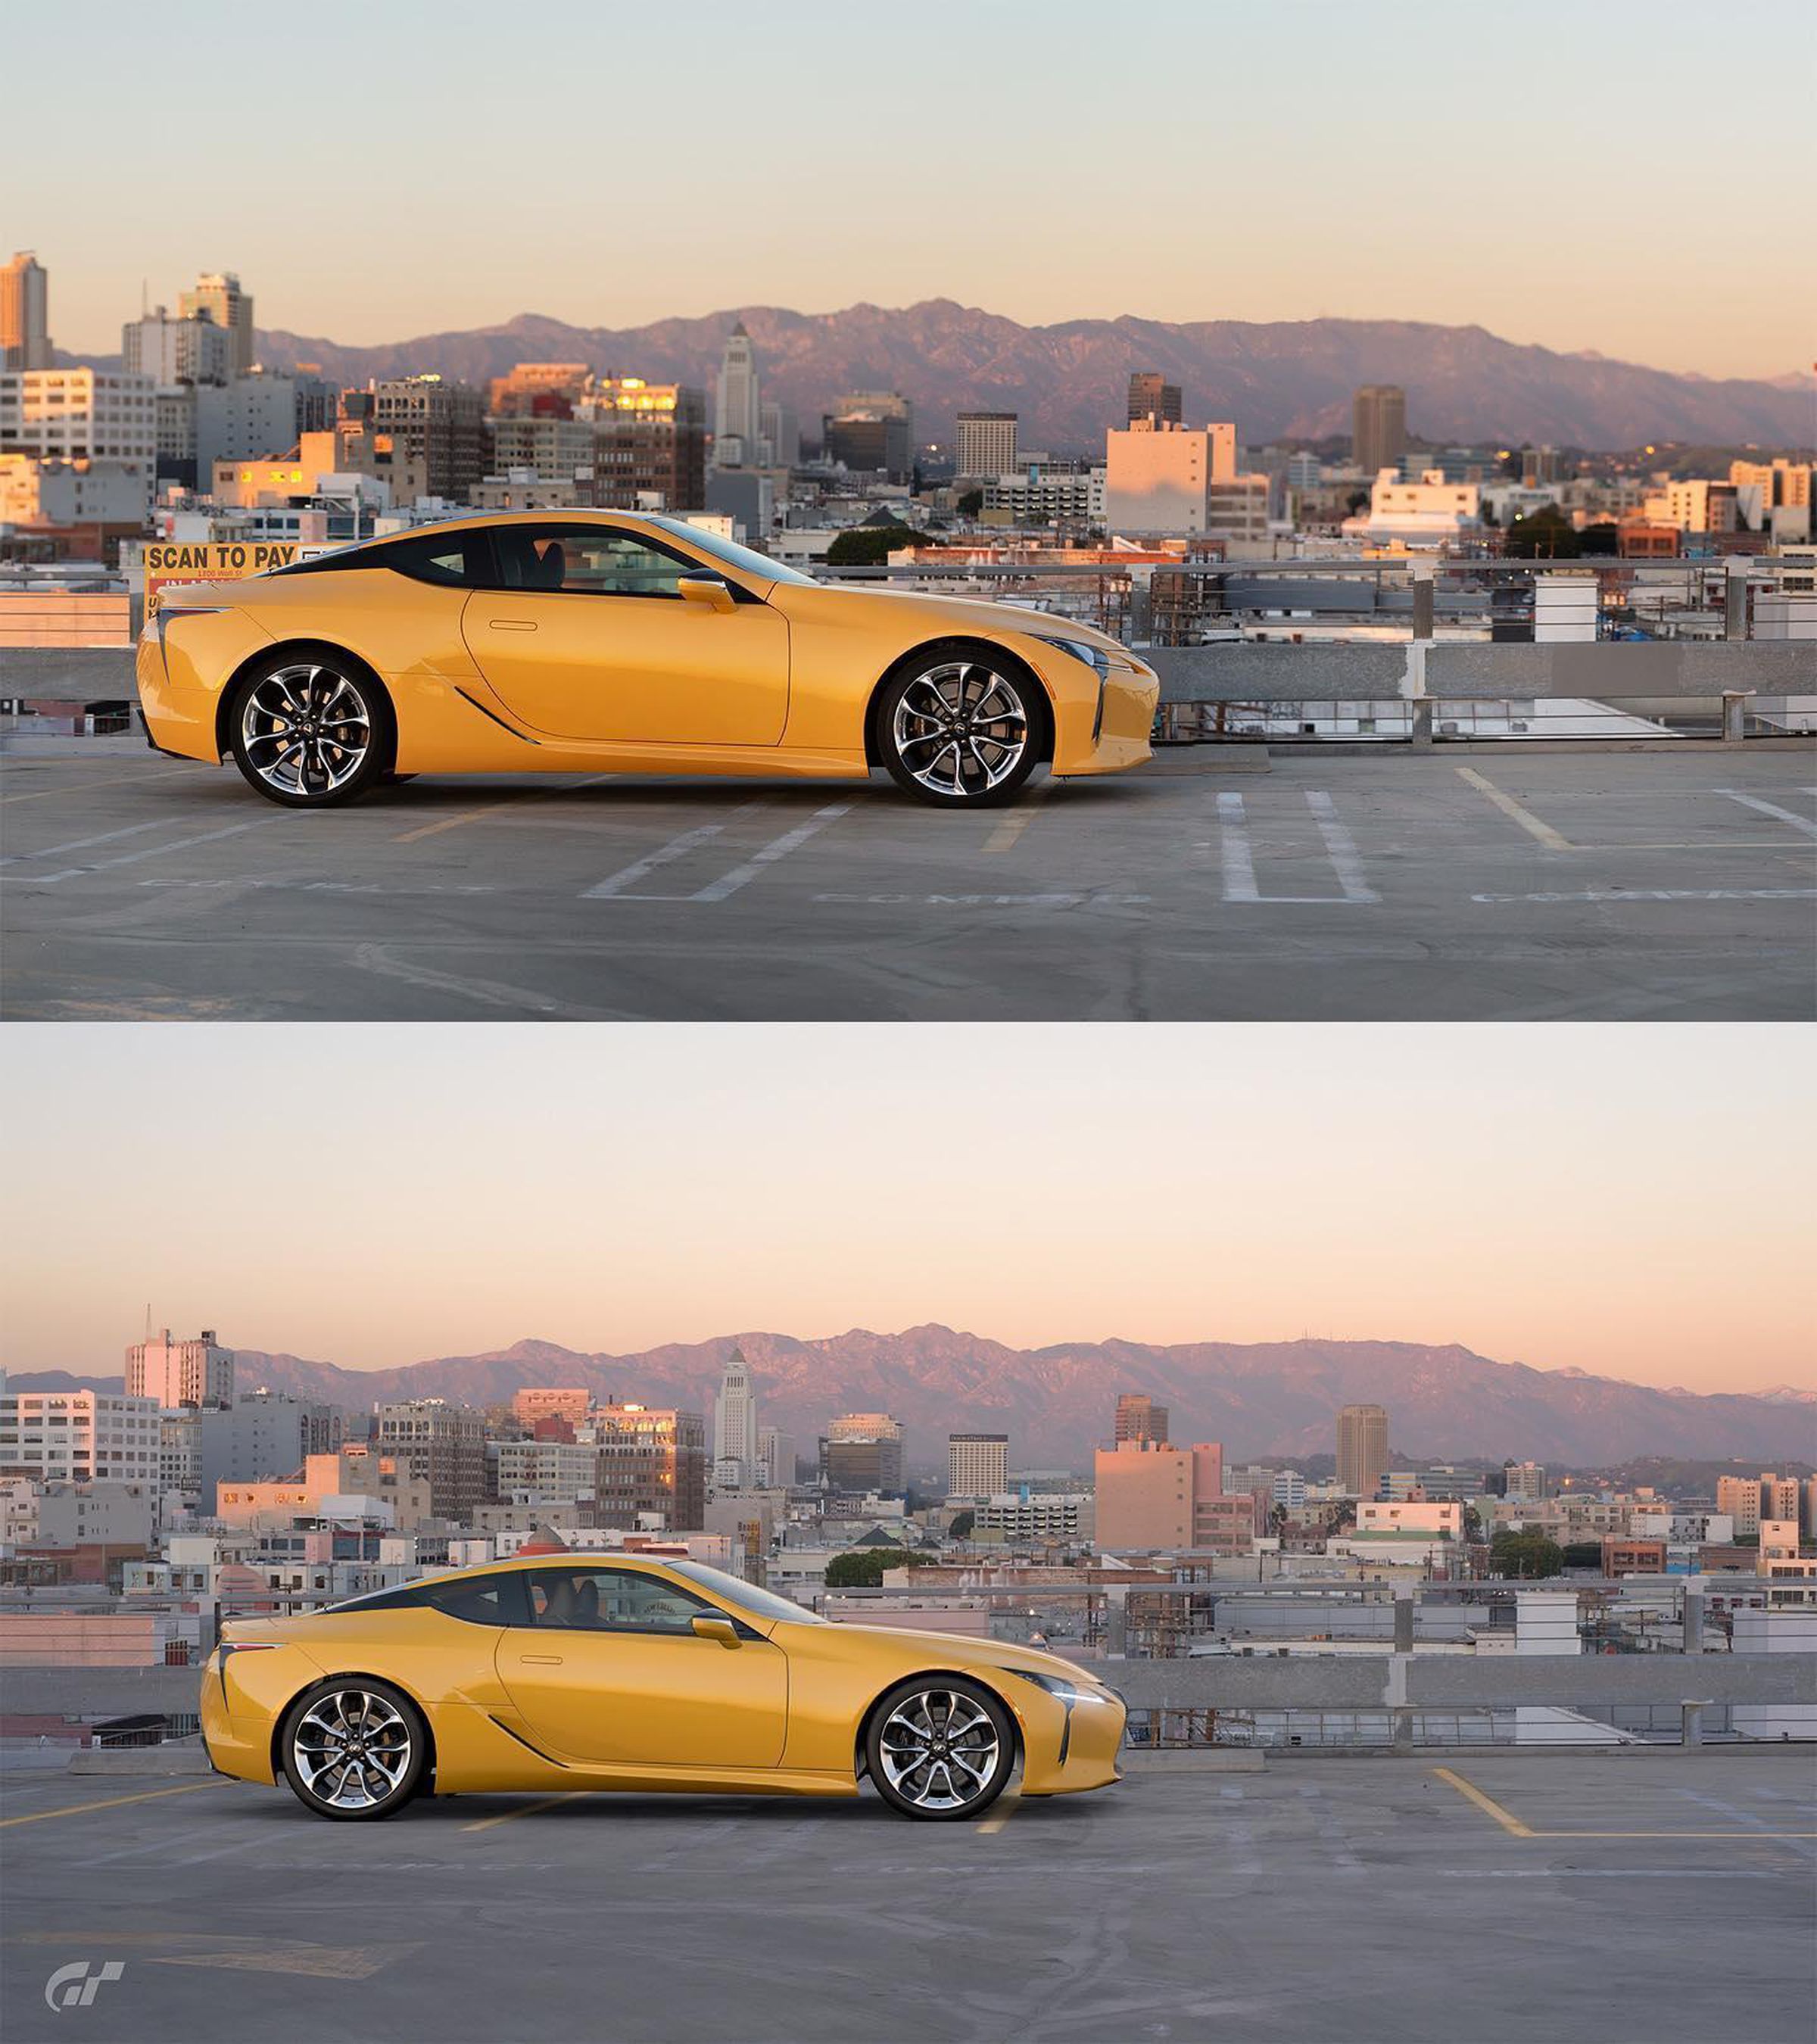 Two pictures of a yellow Lexus LC 500 — the top is the real thing, while the bottom is in-game. Both taken in Los Angeles, CA.